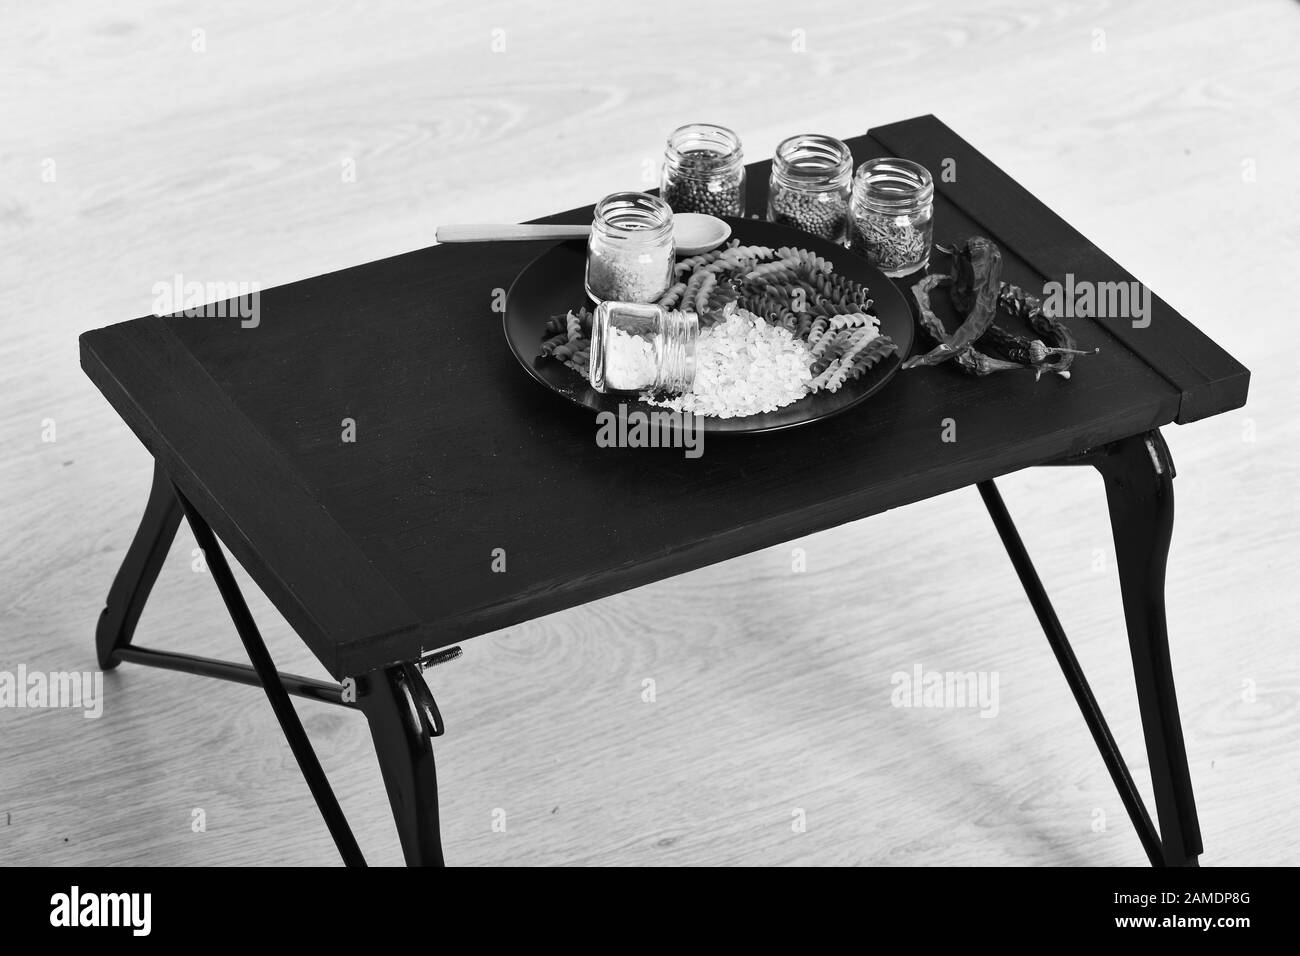 Taste and spicy cuisine concept. Jars of spices near plate of pasta on grey wooden background. Italian dish placed on wooden table tray. Fusilli with salt on plate, spoon and chili pepper nearby. Stock Photo